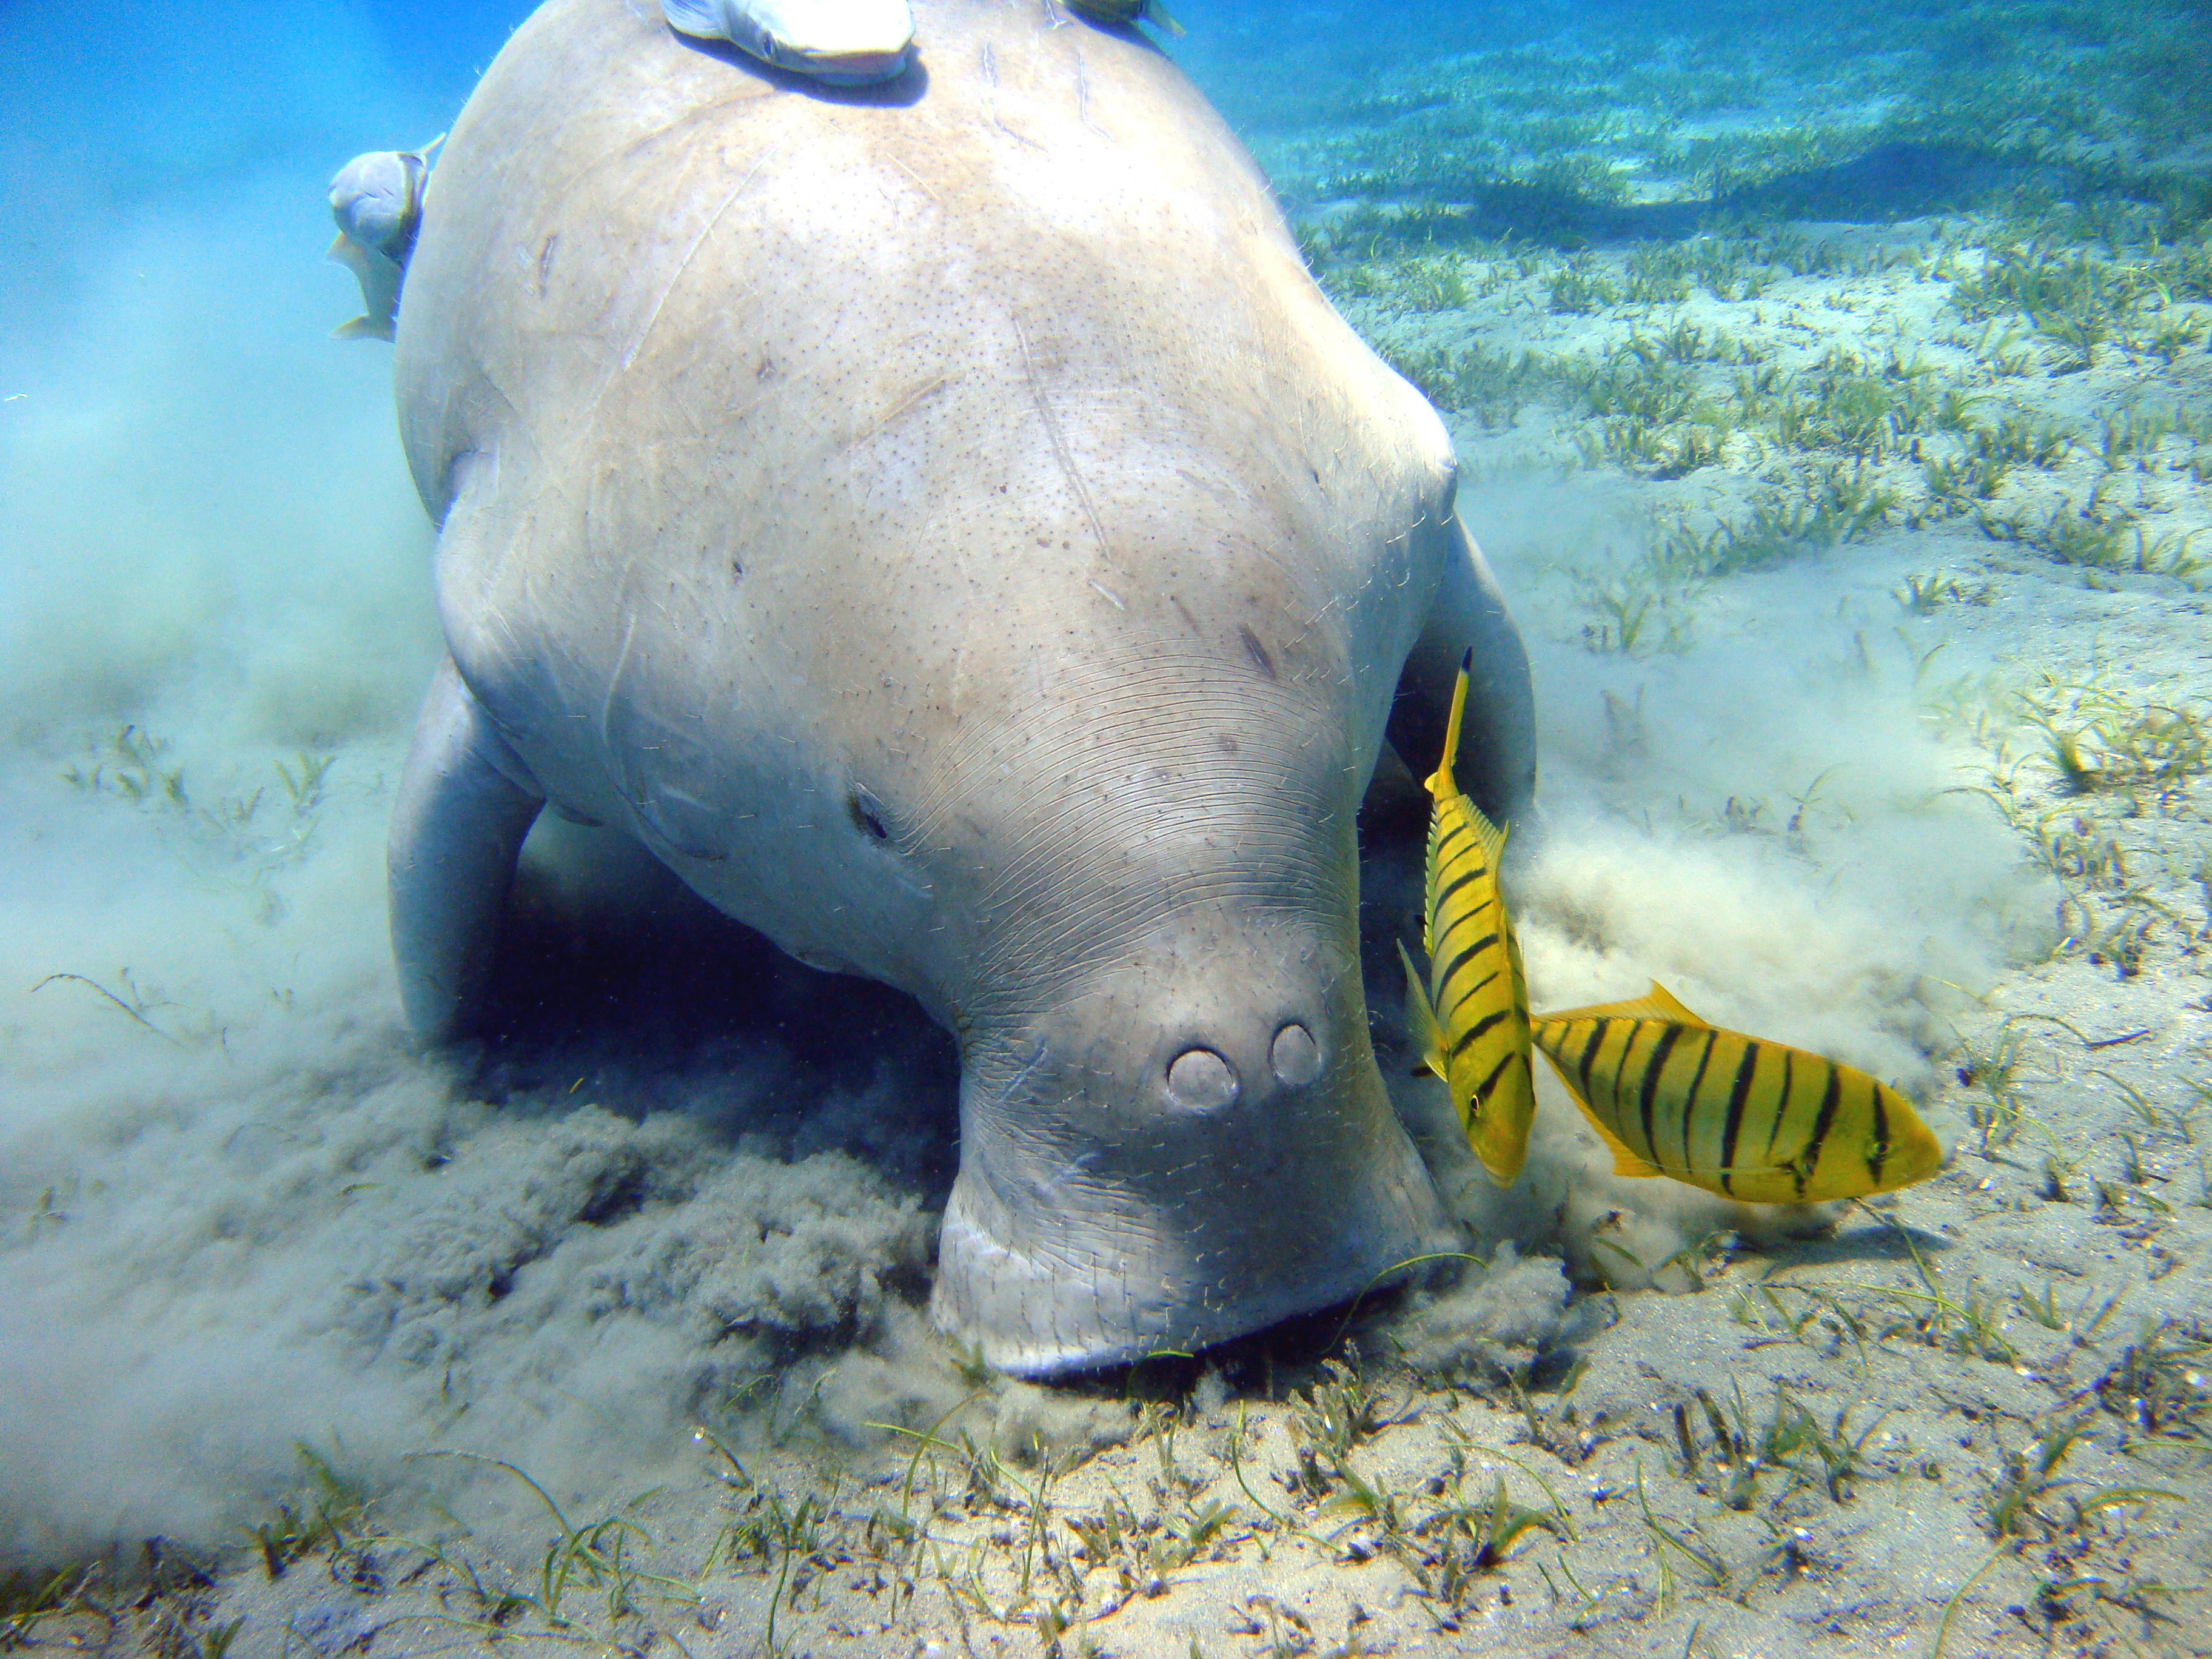 Endangered dugong found dead on Marsa Alam beach - Egypt Independent